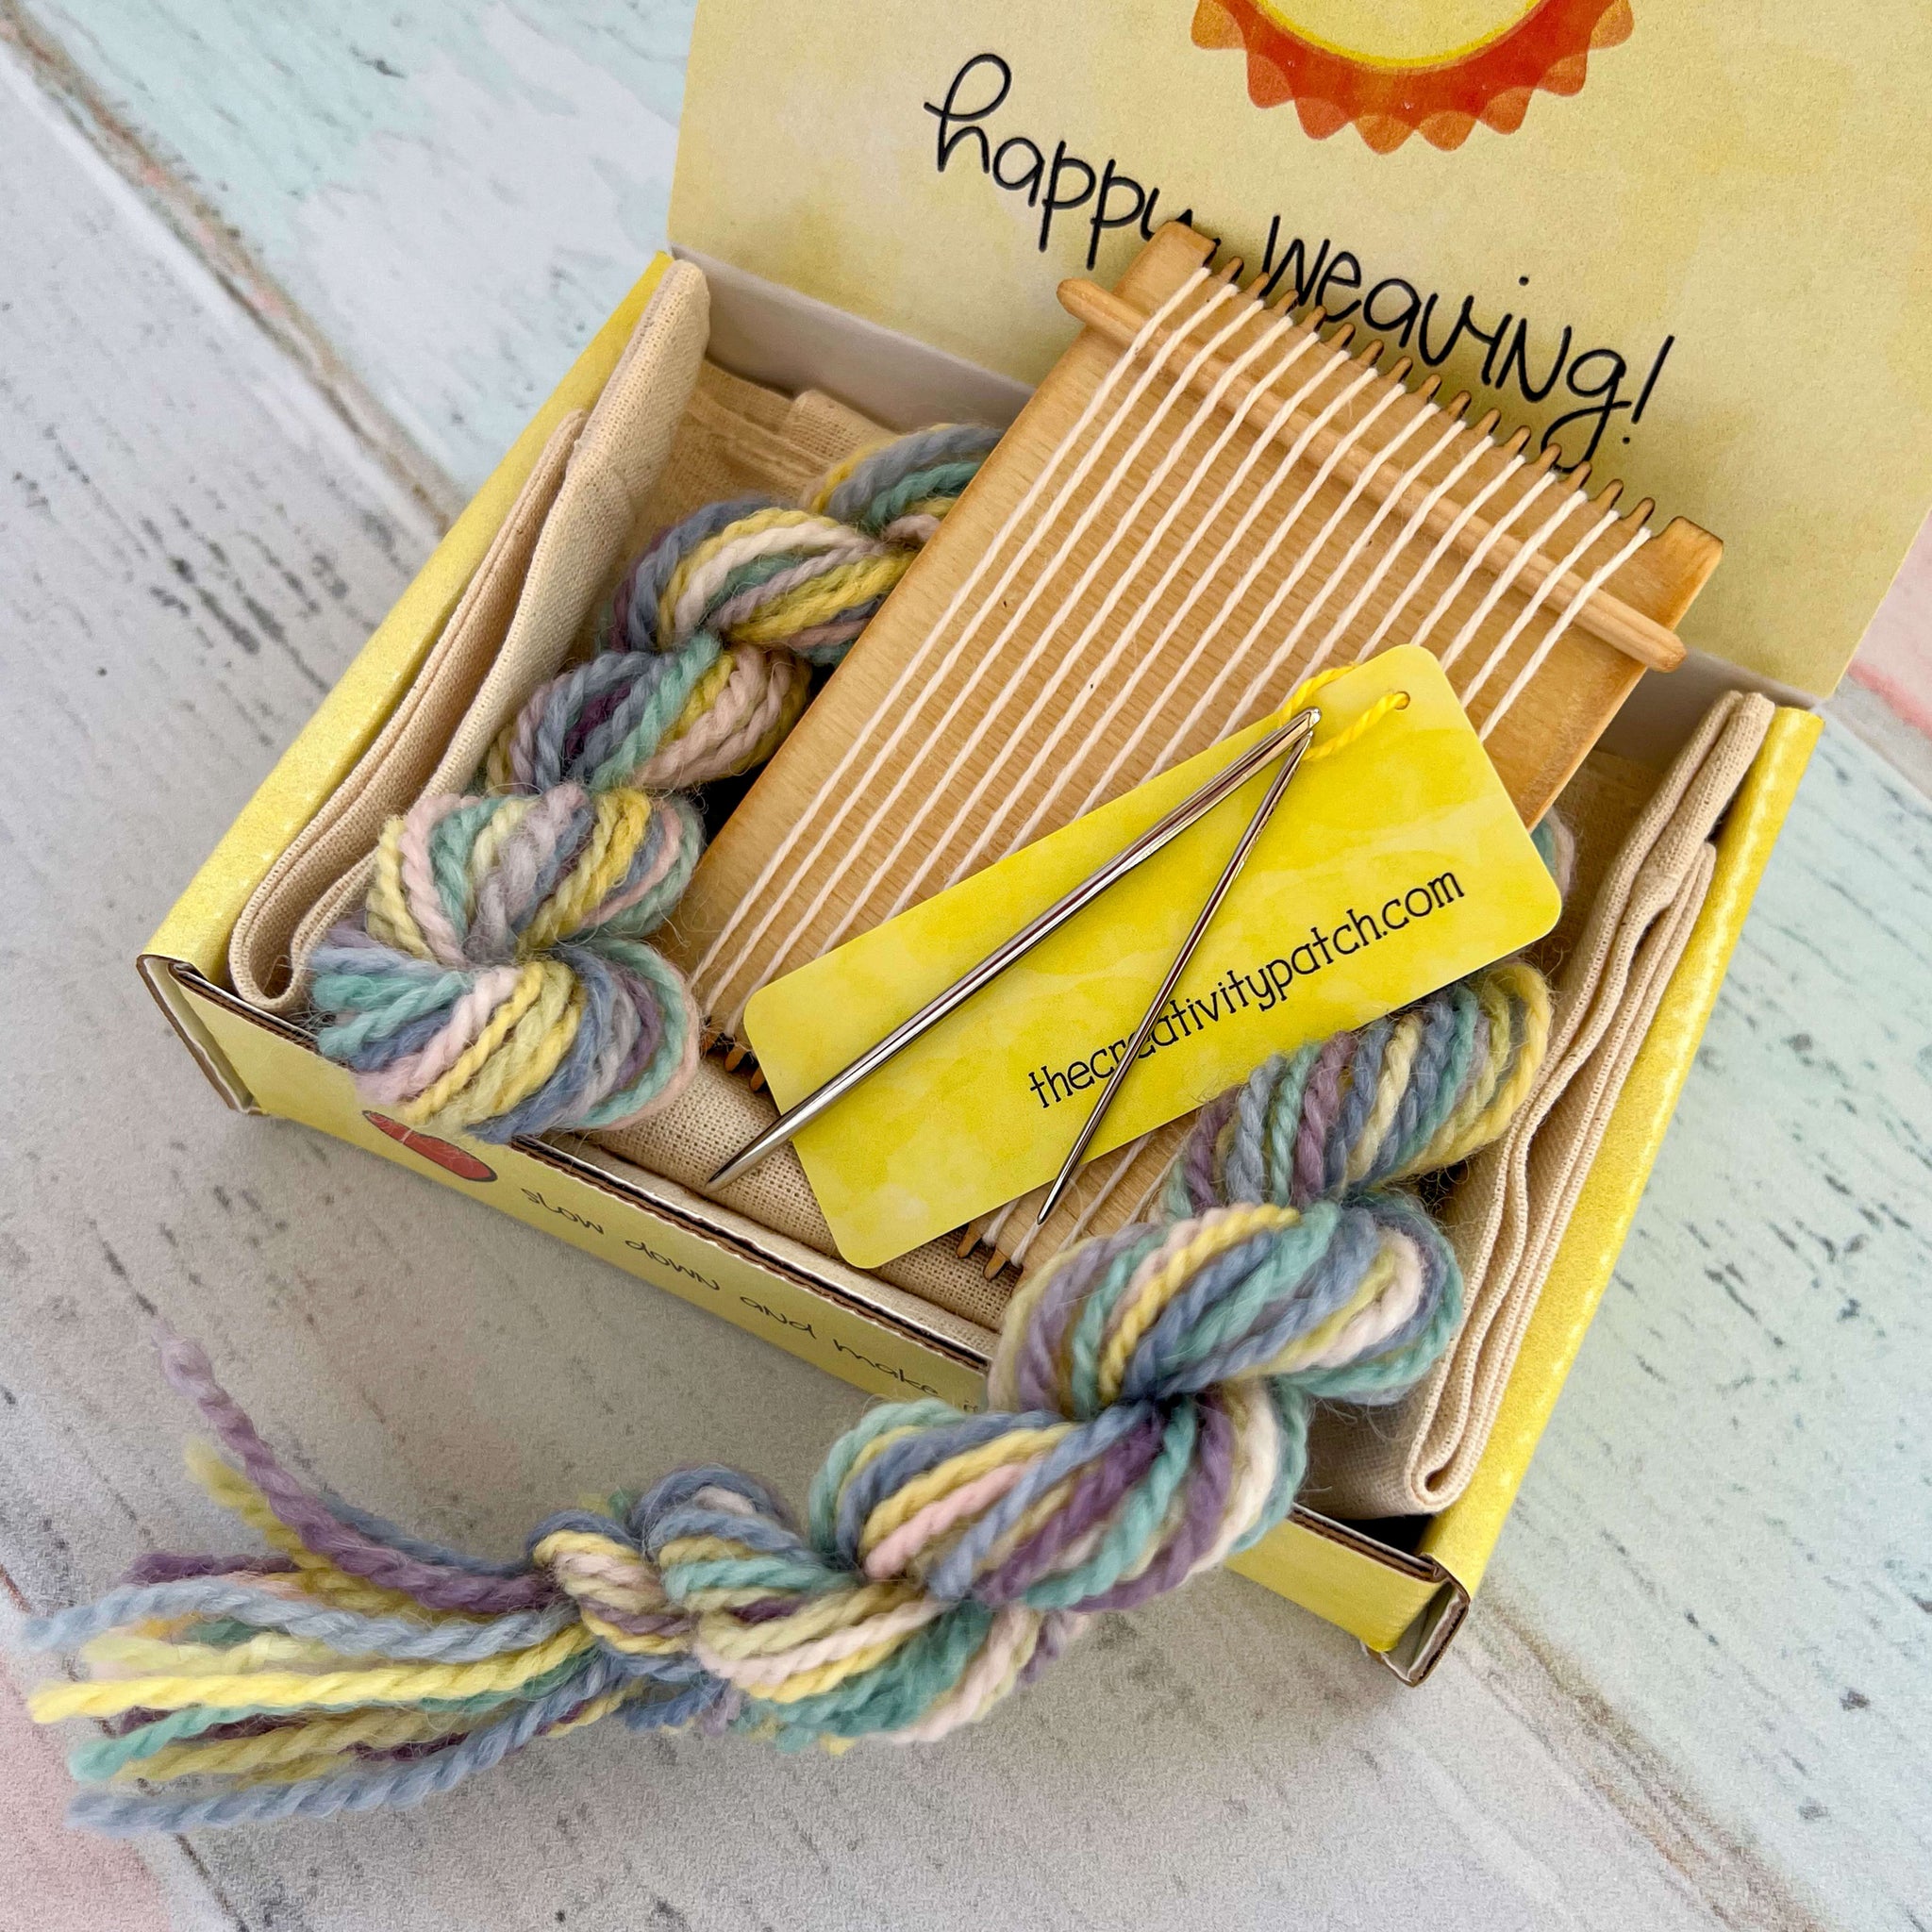 Tiny Wood Loom-Natural Colors - The Creativity Patch - Lucy Jennings